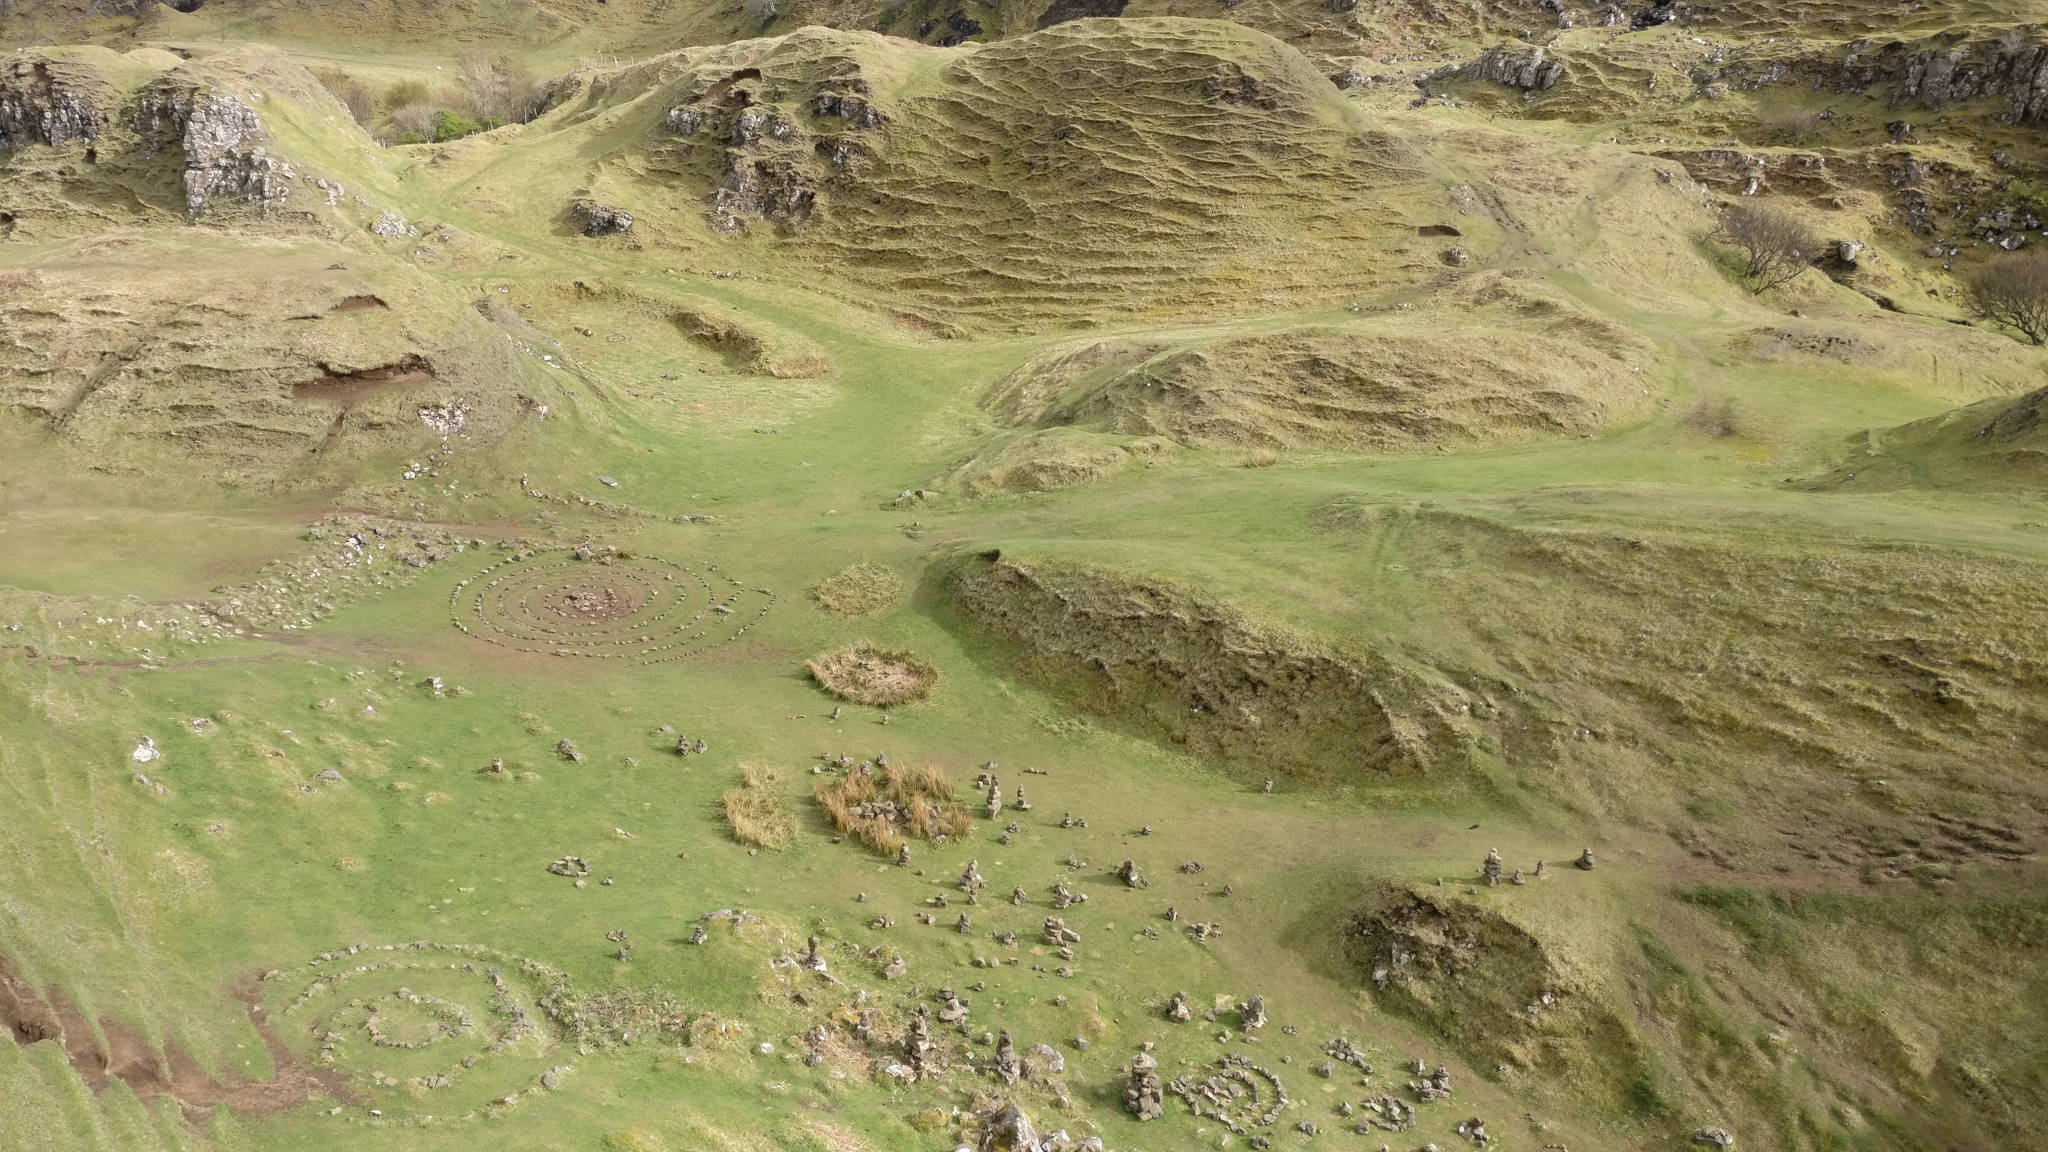 The magical hills of Fairy Glen